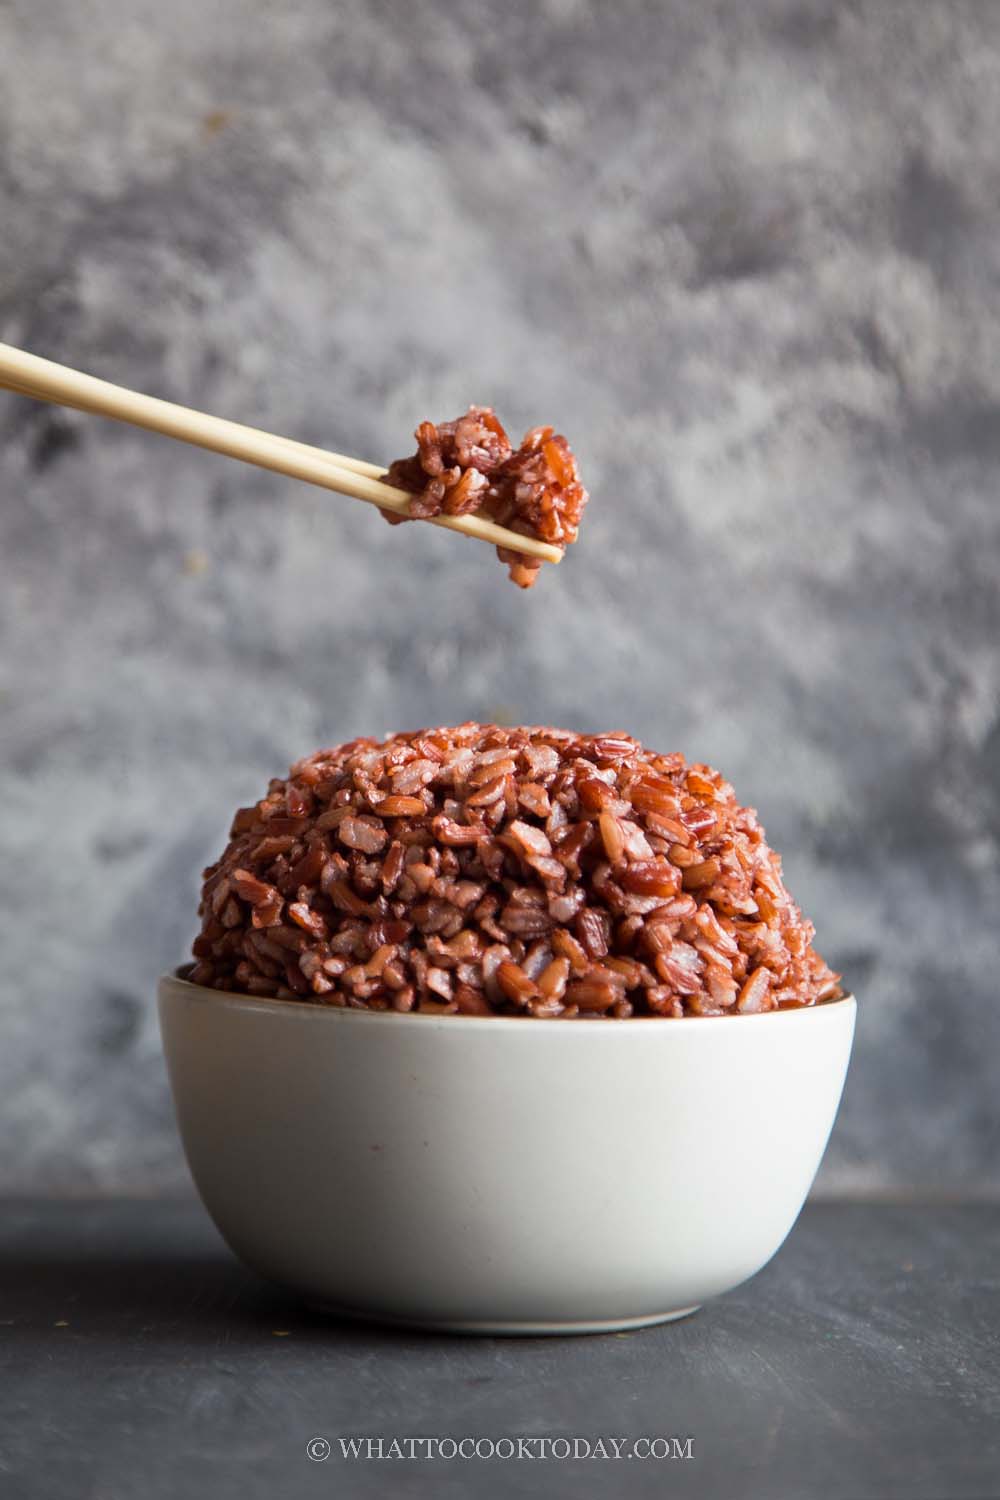 How To Cook Whole Grain Red Rice